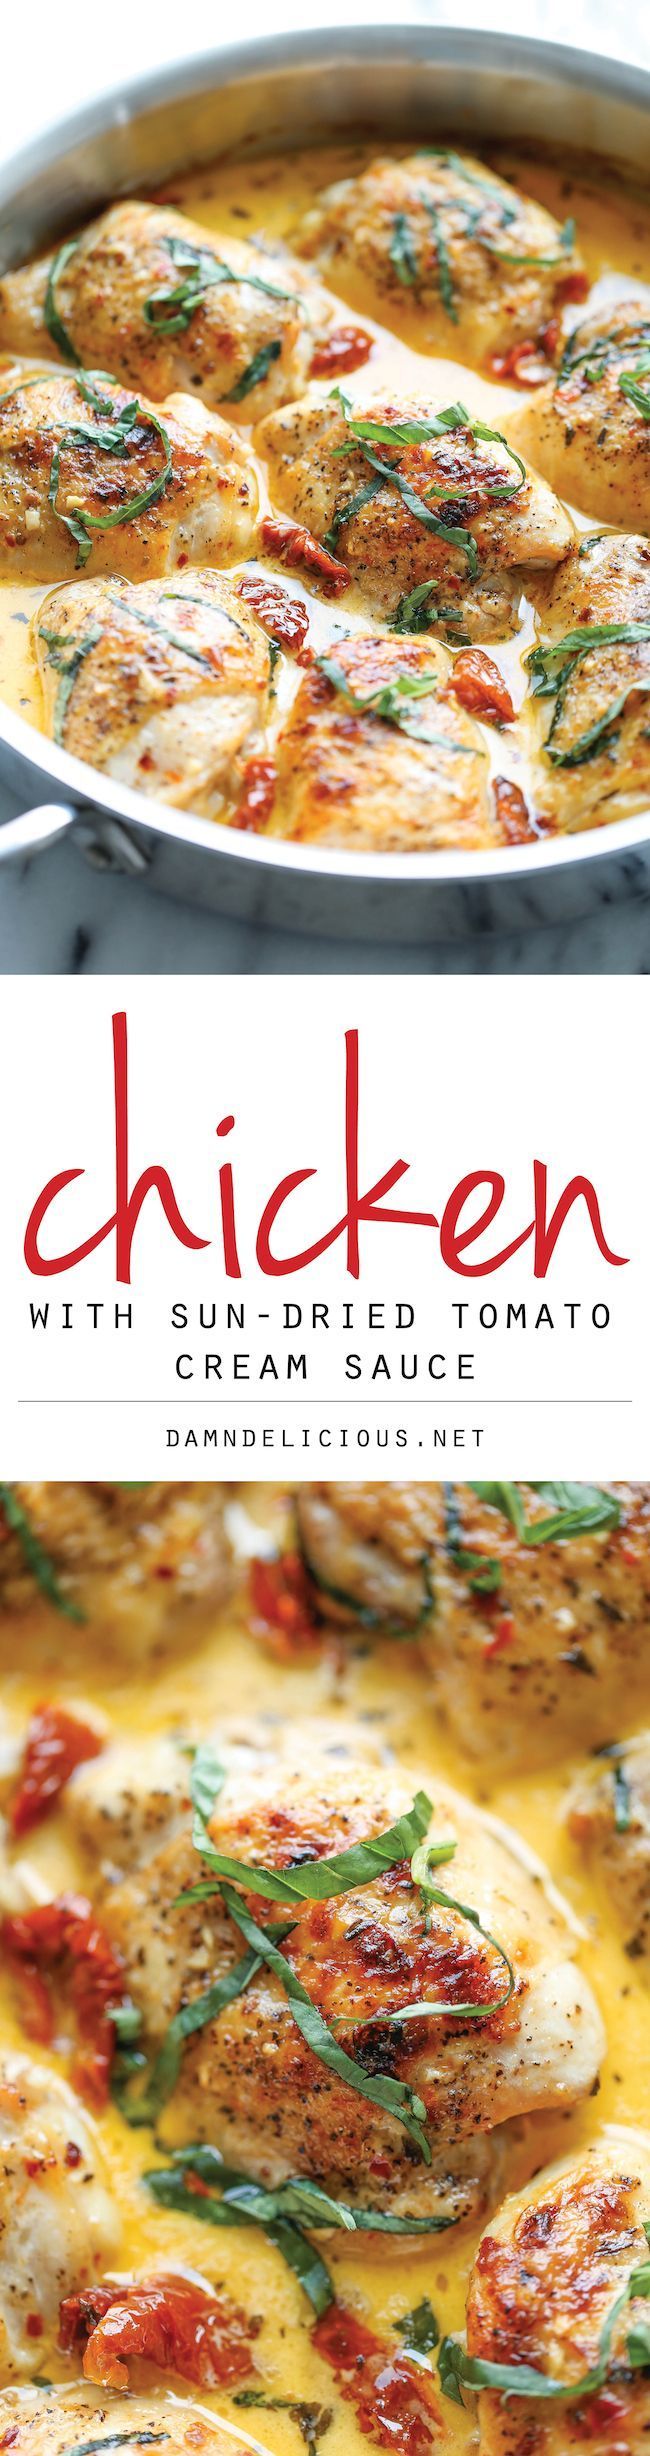 Chicken with Sun-Dried Tomato Cream Sauce – Crisp-tender chicken in the most amazing cream sauce ever. It’s so good, you’ll want